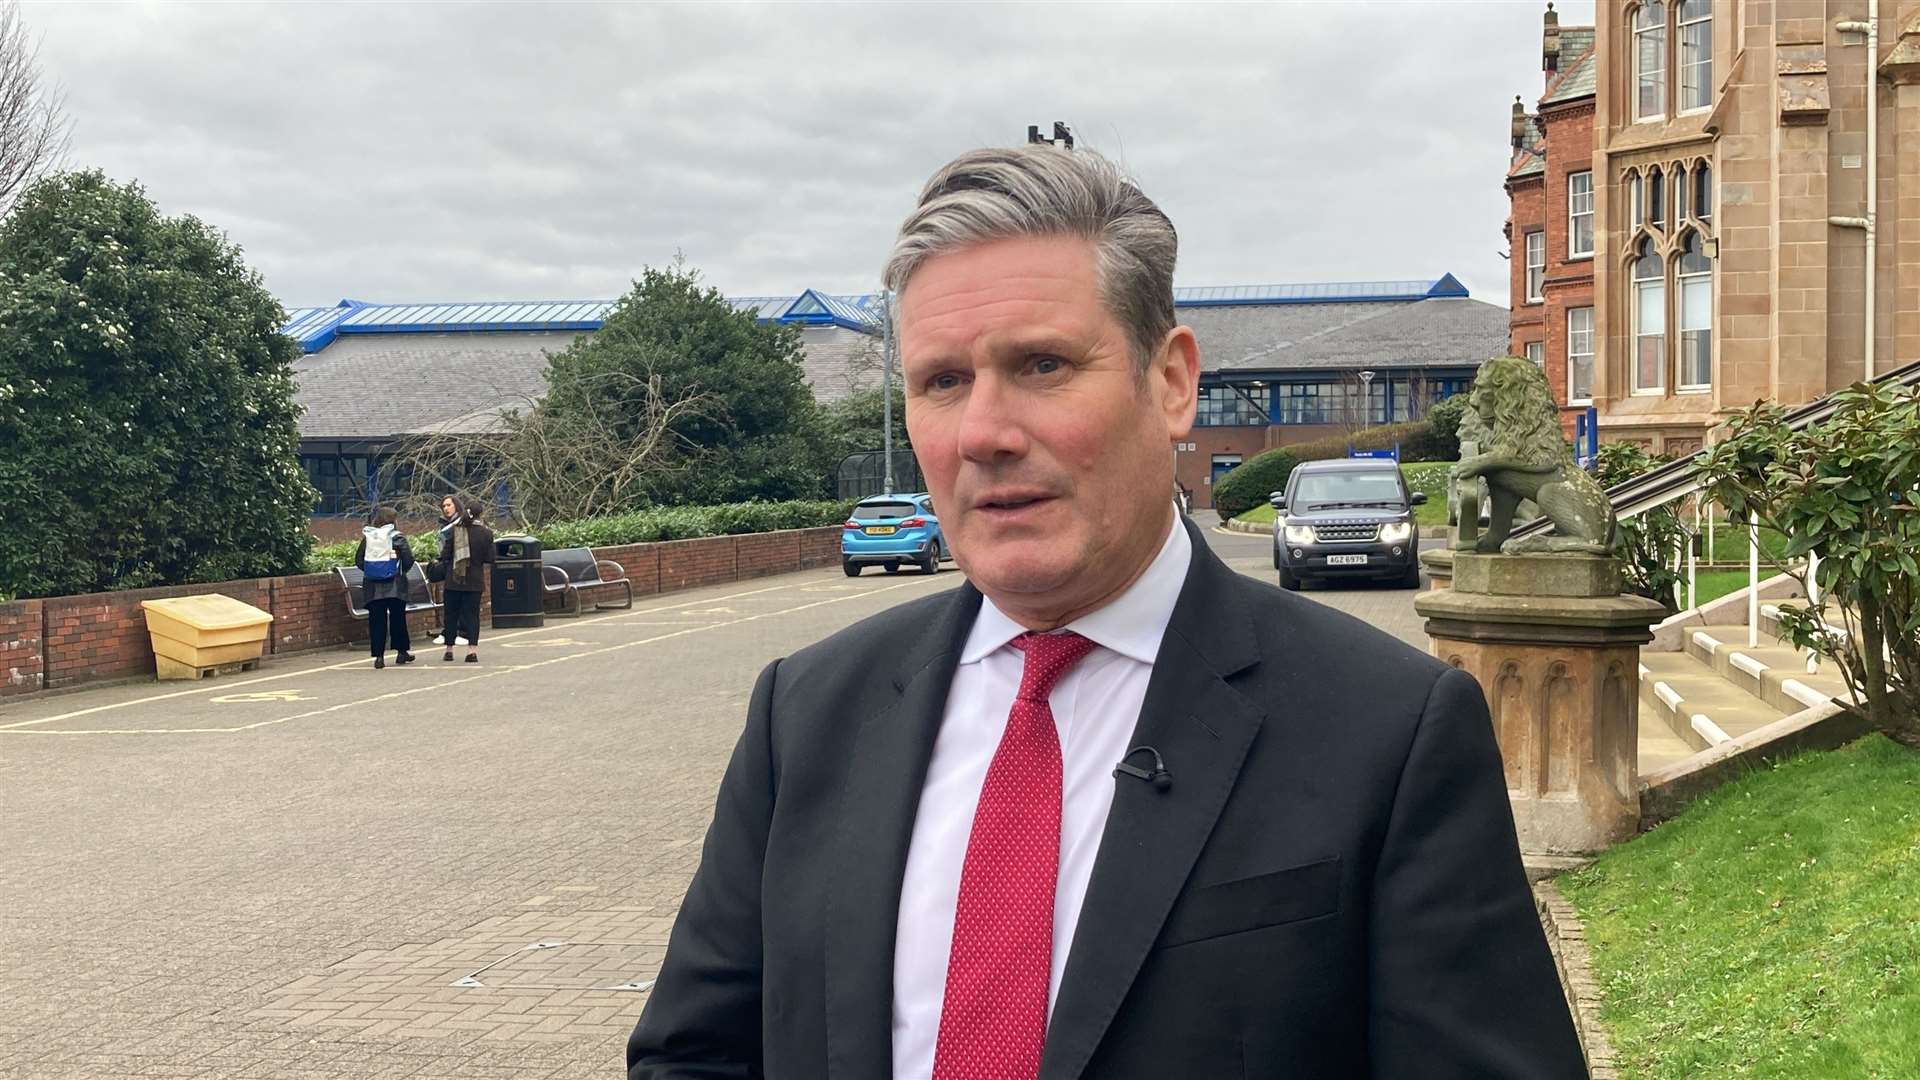 Labour leader Sir Keir Starmer speaks to broadcasters during a visit to the Ulster University in Londonderry on Friday (Rebecca Black/PA)